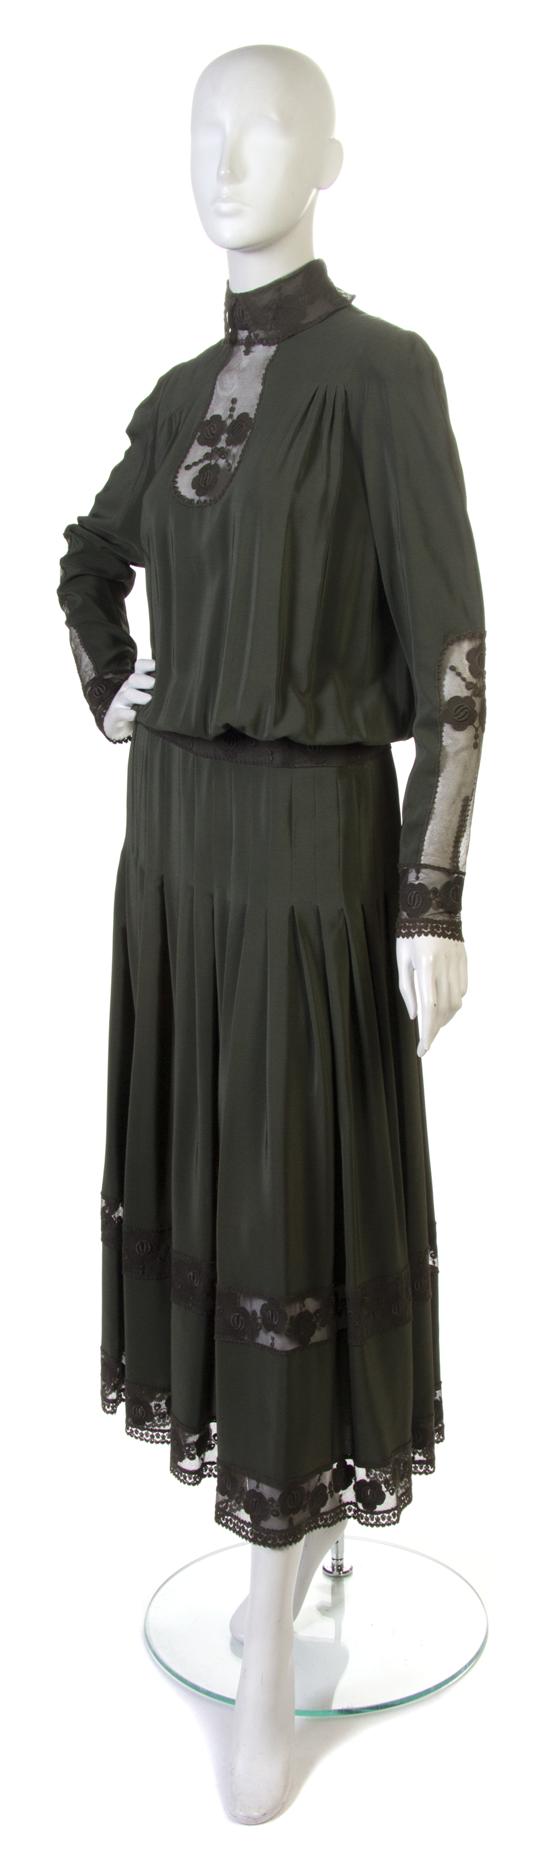 A Chloe Green Silk Dress with lace